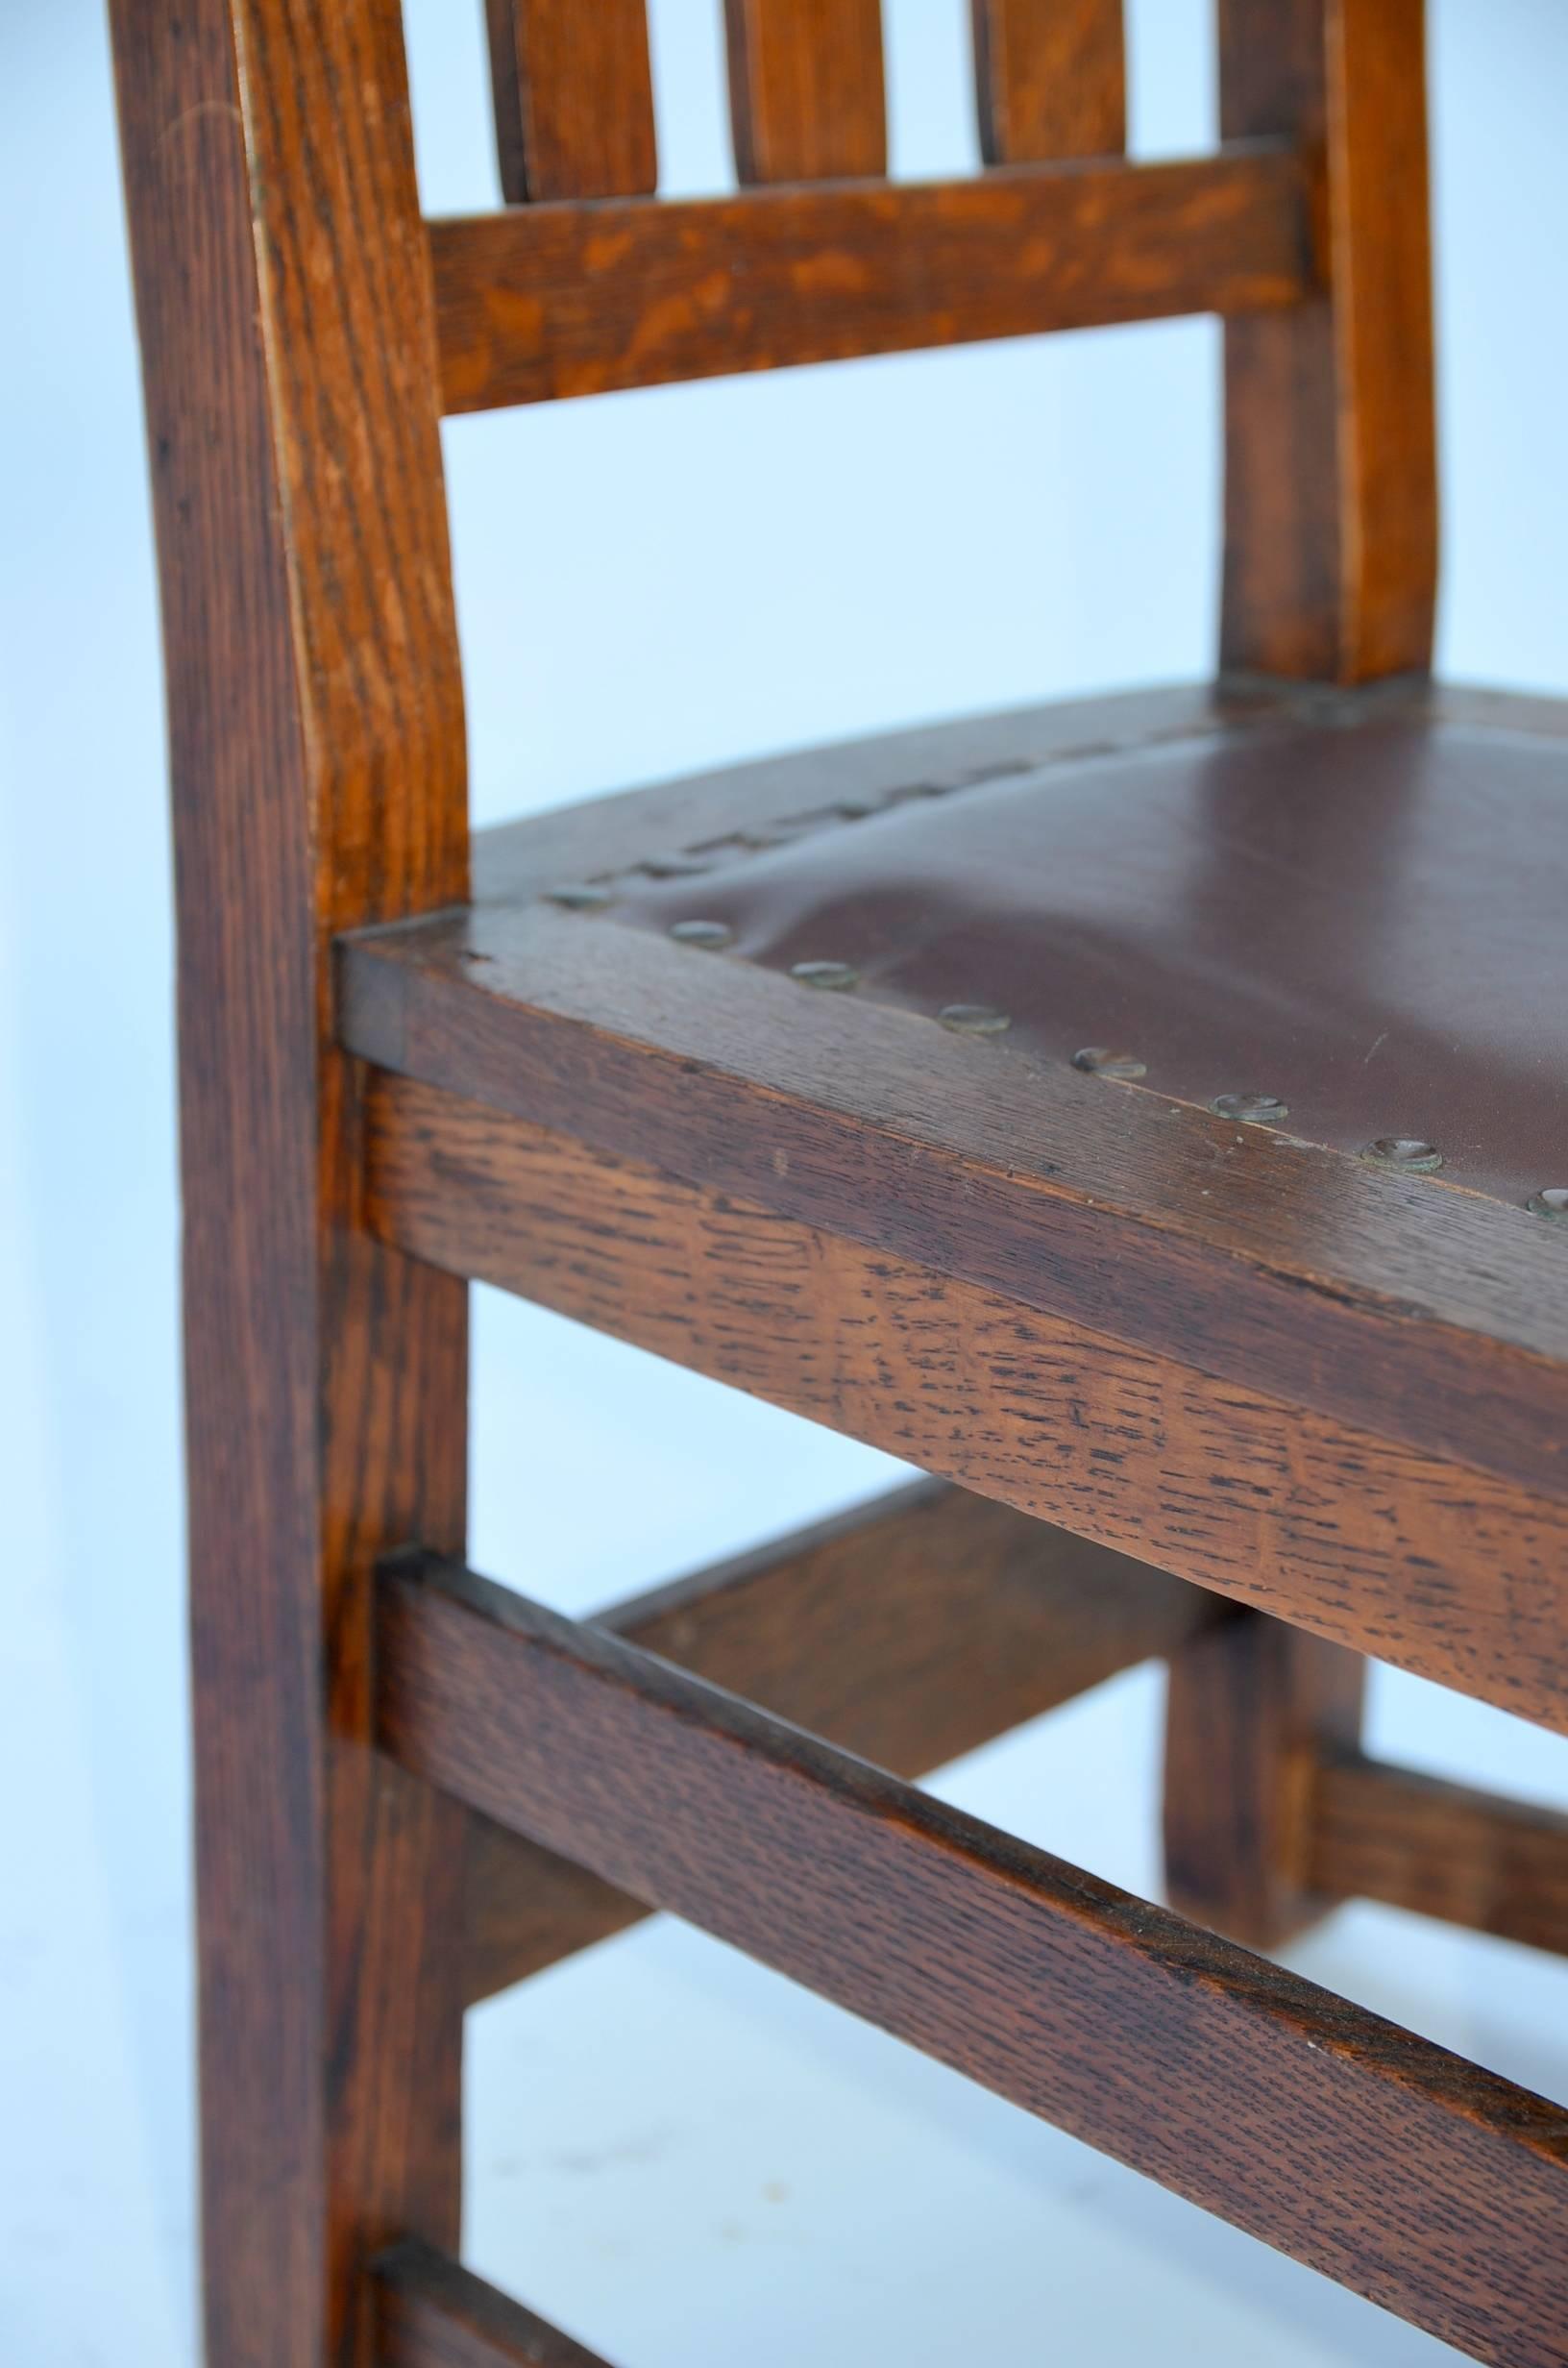 American Original Mission Style Arts & Crafts Oak Chair by Stickley Brothers